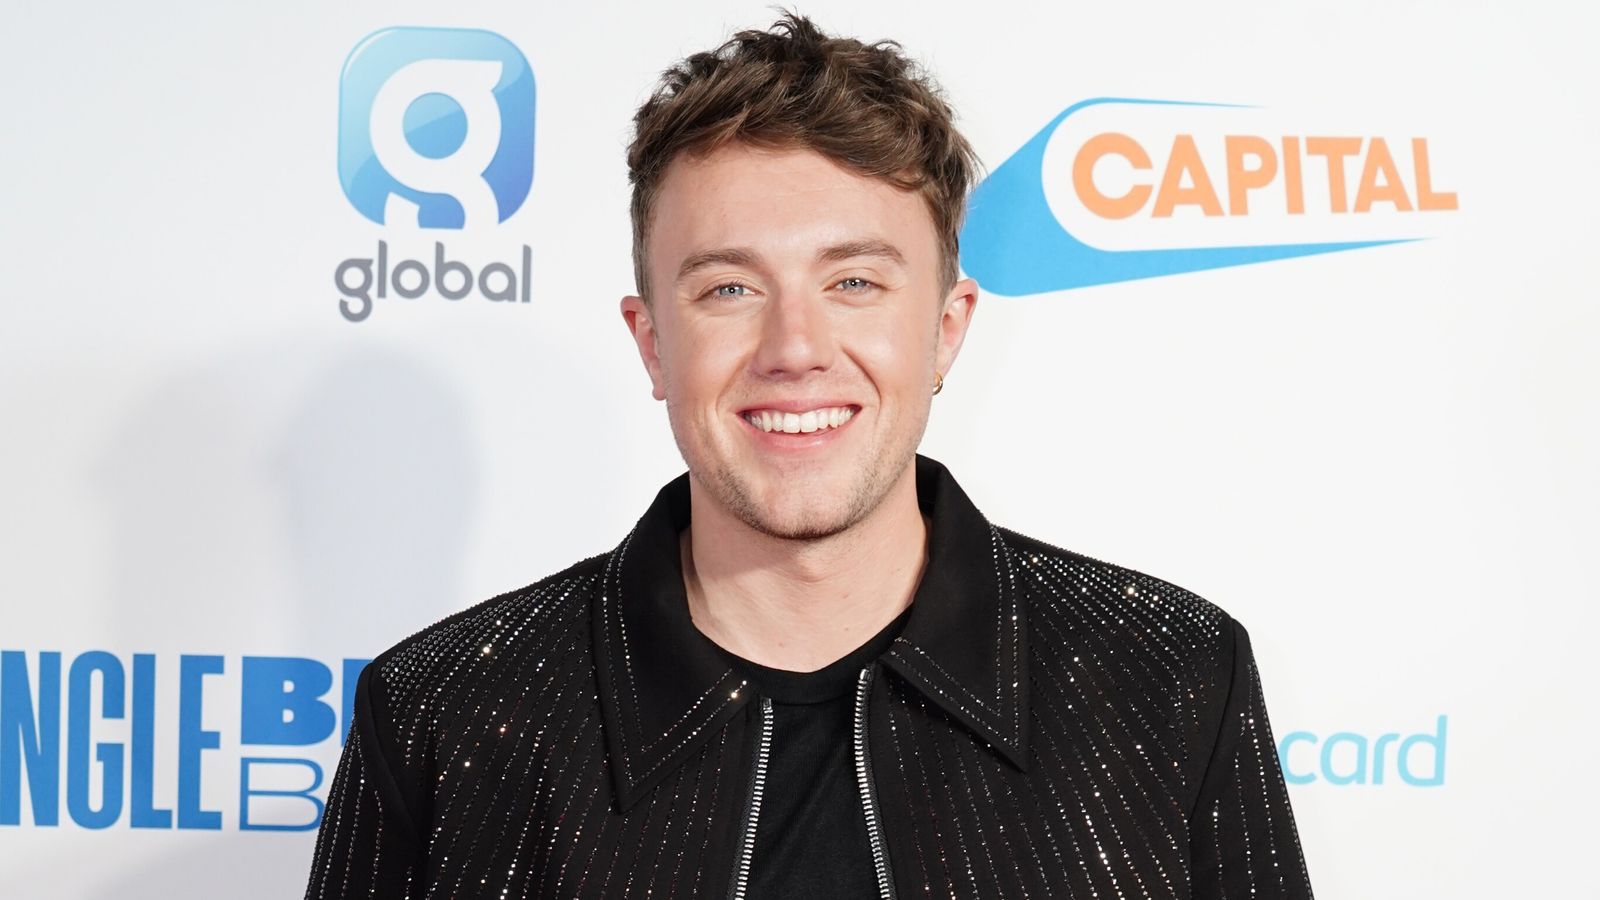 Roman Kemp says he left Capital breakfast show to stop reliving tragedy of friend's death